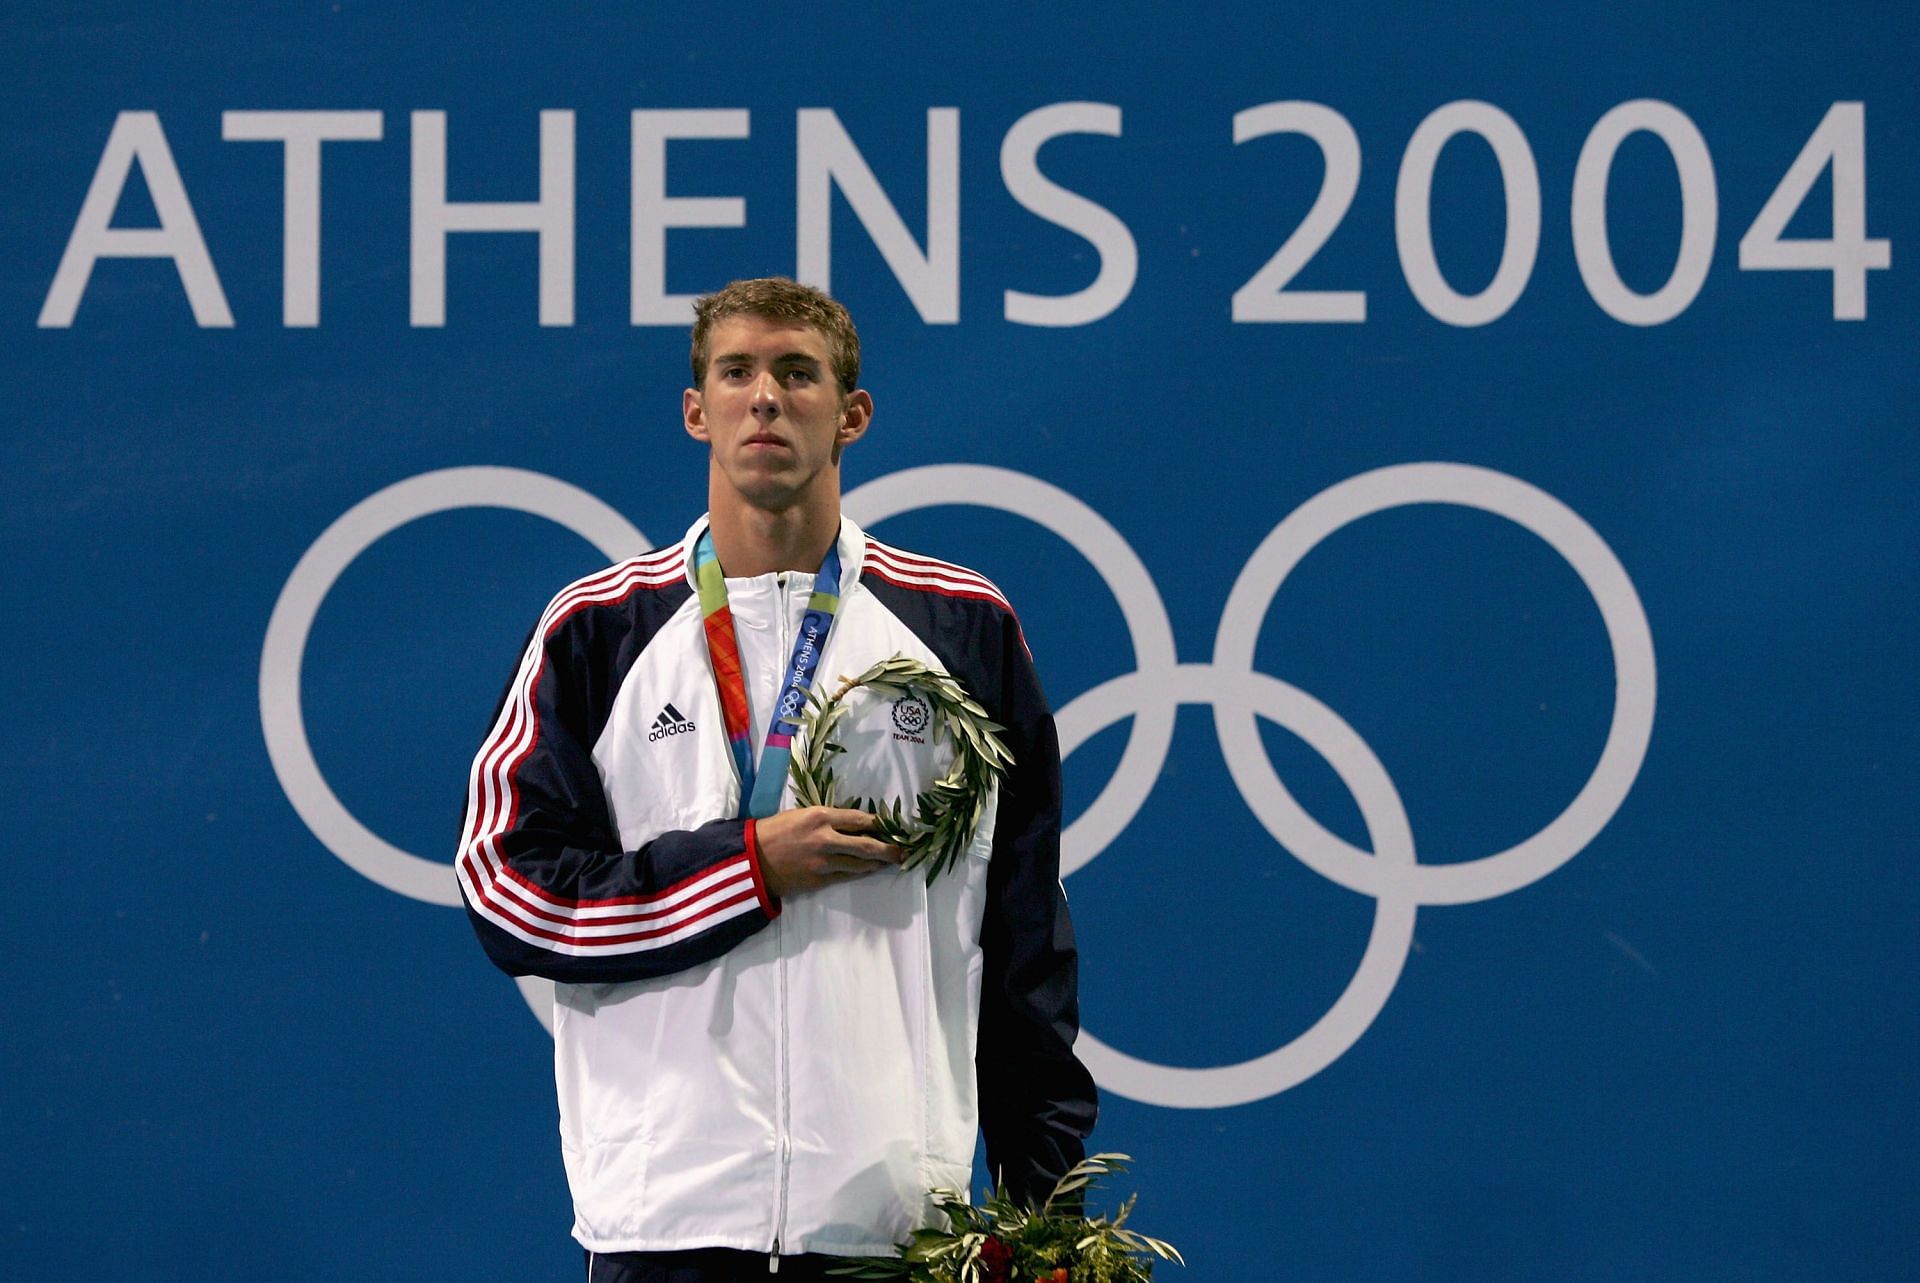 Michael Phelps during the Mens 100m Butterfly Medal Ceremony of 2004 Olympics